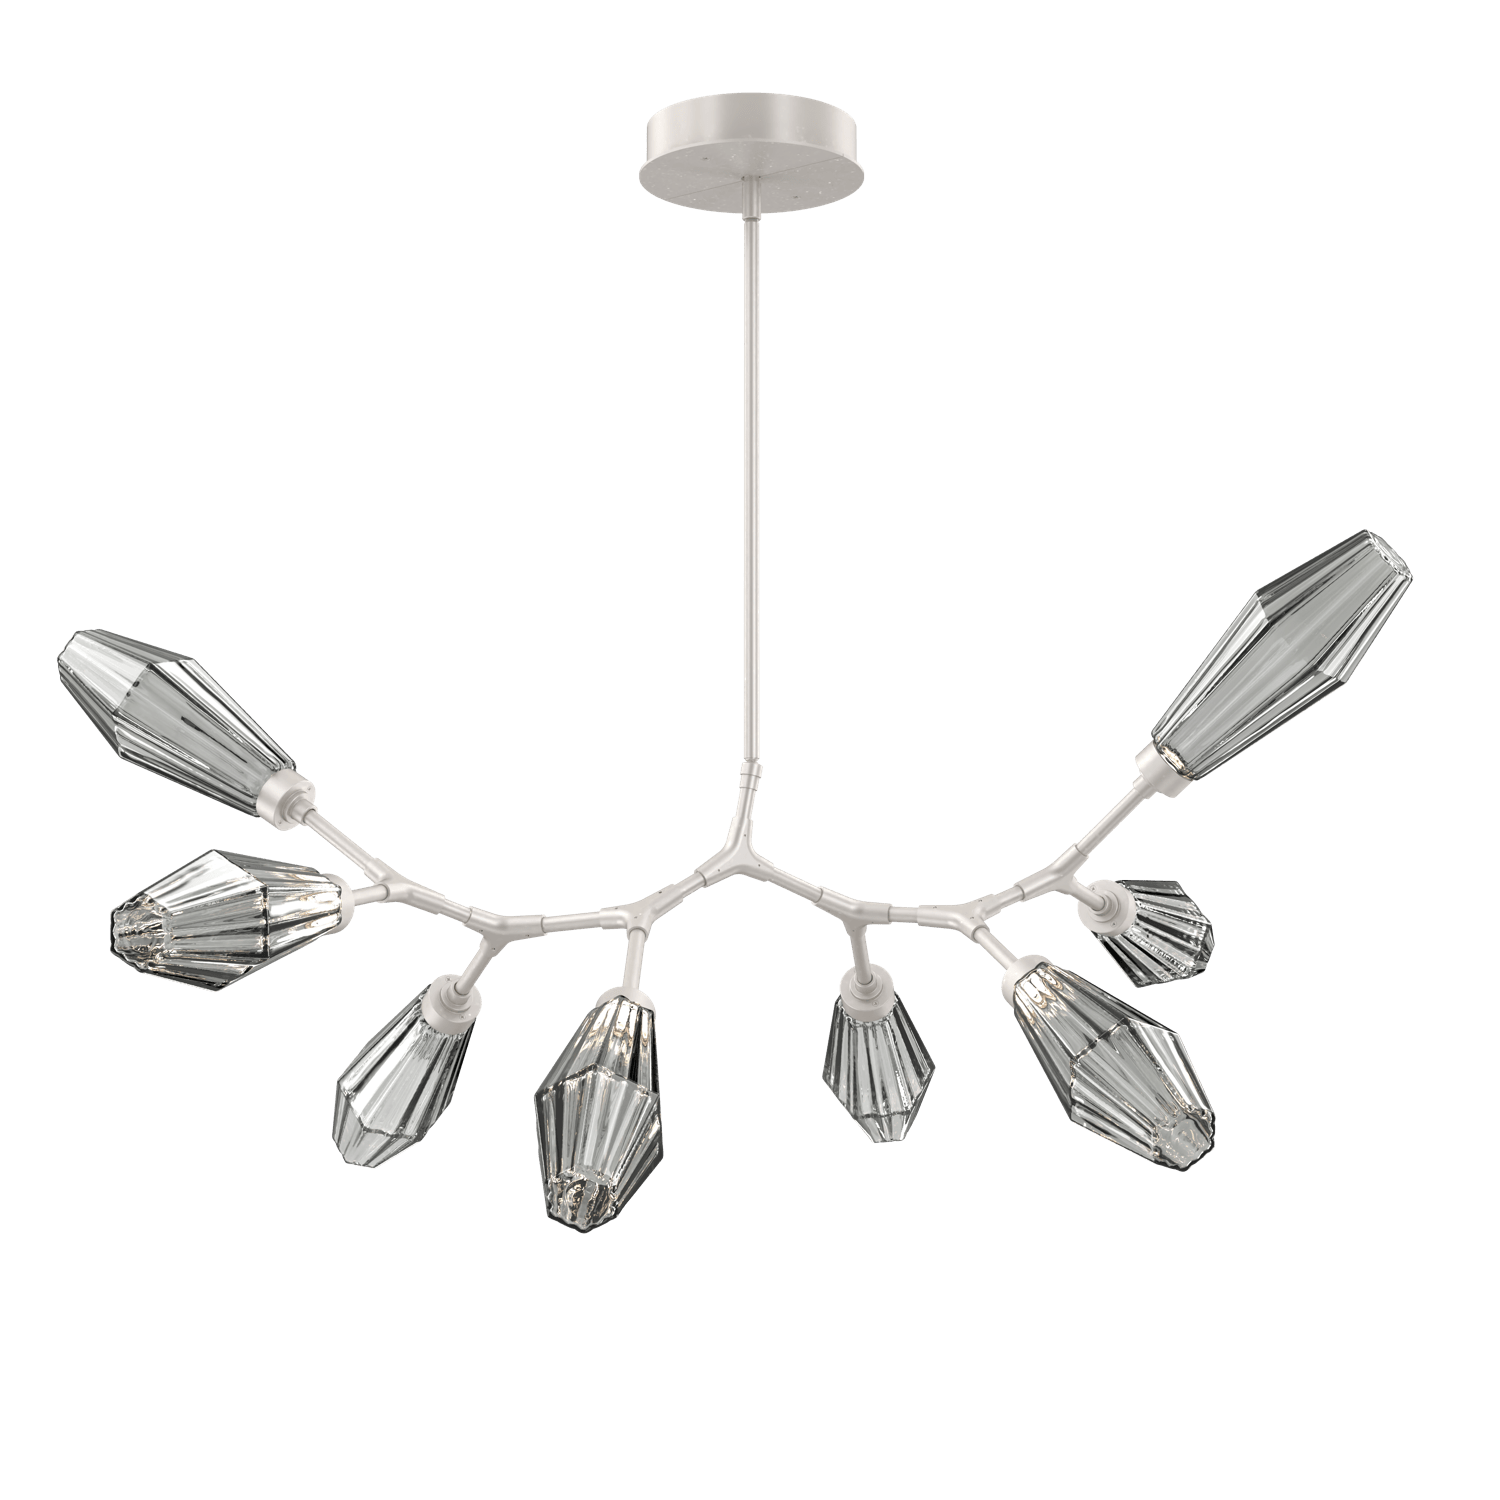 PLB0049-BB-BS-RS-Hammerton-Studio-Aalto-8-light-modern-branch-chandelier-with-metallic-beige-silver-finish-and-optic-ribbed-smoke-glass-shades-and-LED-lamping